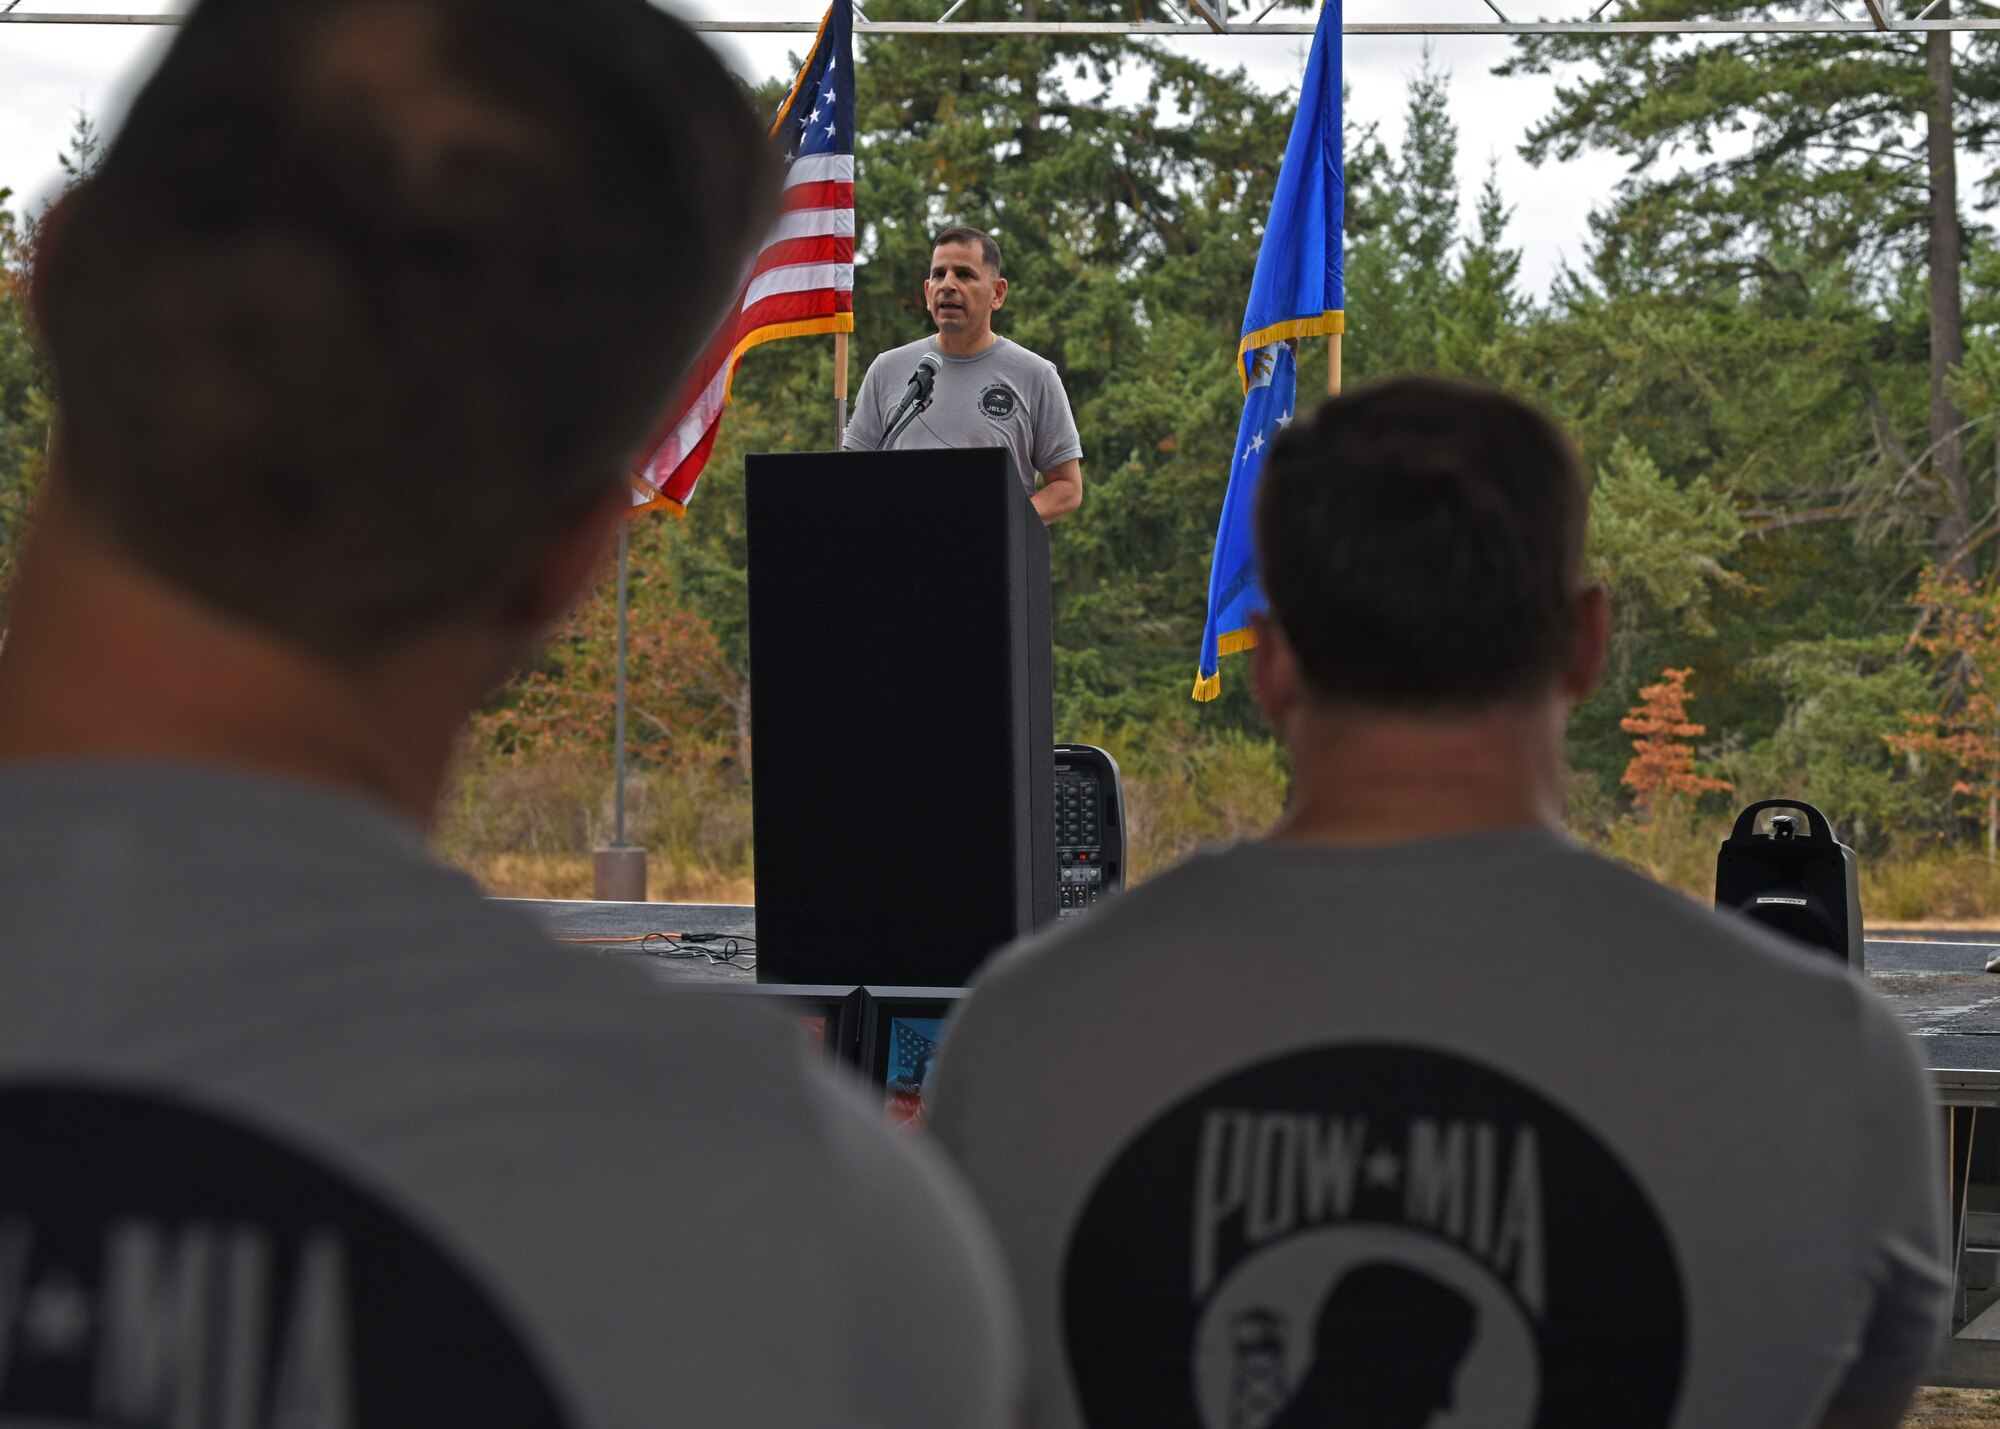 U.S. Air Force Col. Sergio Anaya, 62nd Operations Group commander, gives opening remarks during the 24-hour POW/MIA Remembrance run at Joint Base Lewis-McChord, Washington, Sept. 15, 2021. Team McChord planned several events this week to honor the lives and sacrifices of those men and women who were prisoners of war or missing in action, including a Missing Man Table and Honors Ceremony, a community motorcycle ride and a wreath laying ceremony. (U.S. Air Force photo by Senior Airman Zoe Thacker)